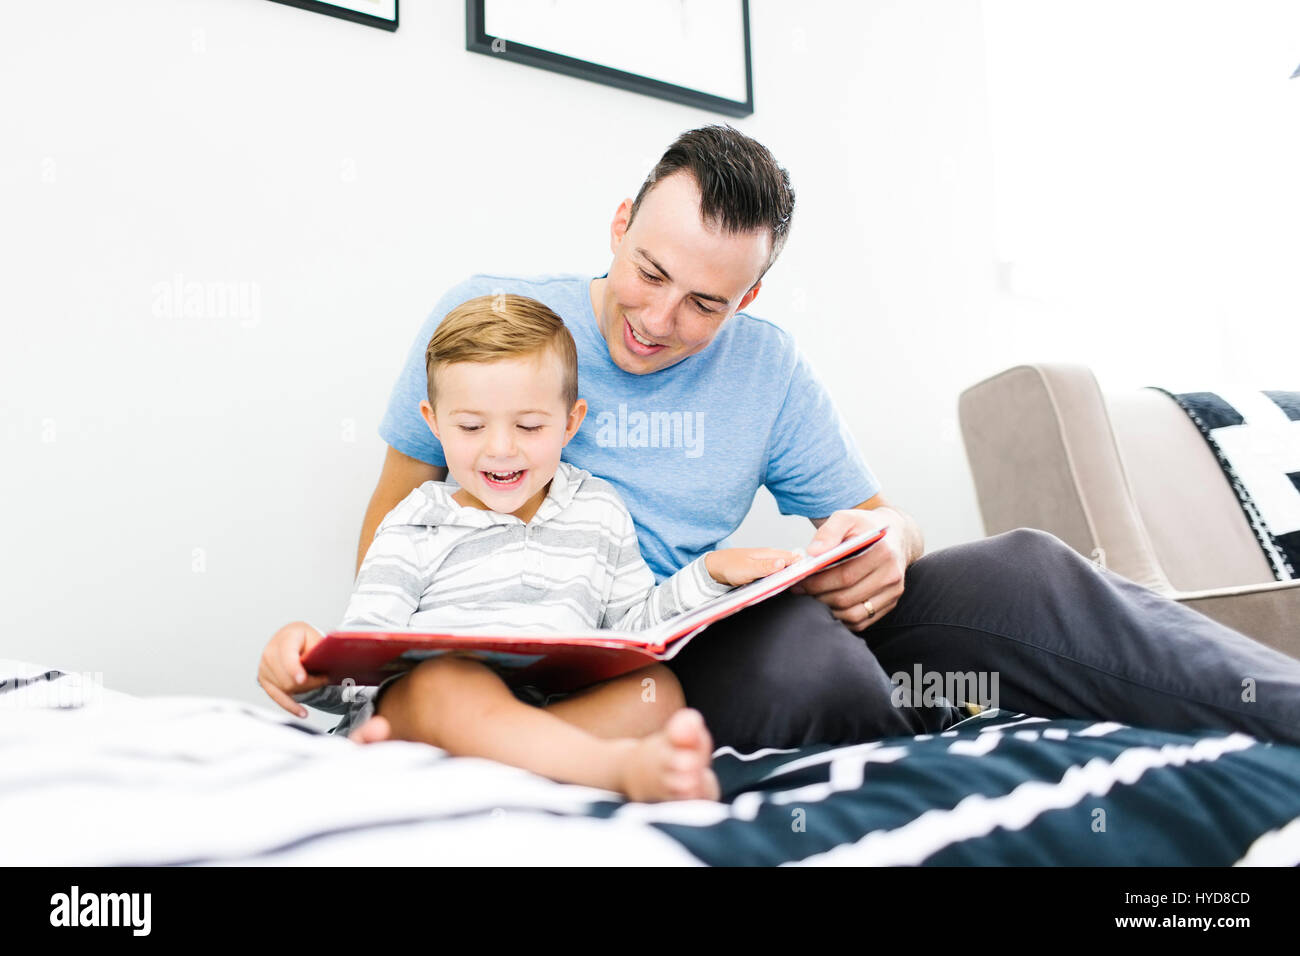 Father and son (4-5) sitting on bed and reading book Stock Photo